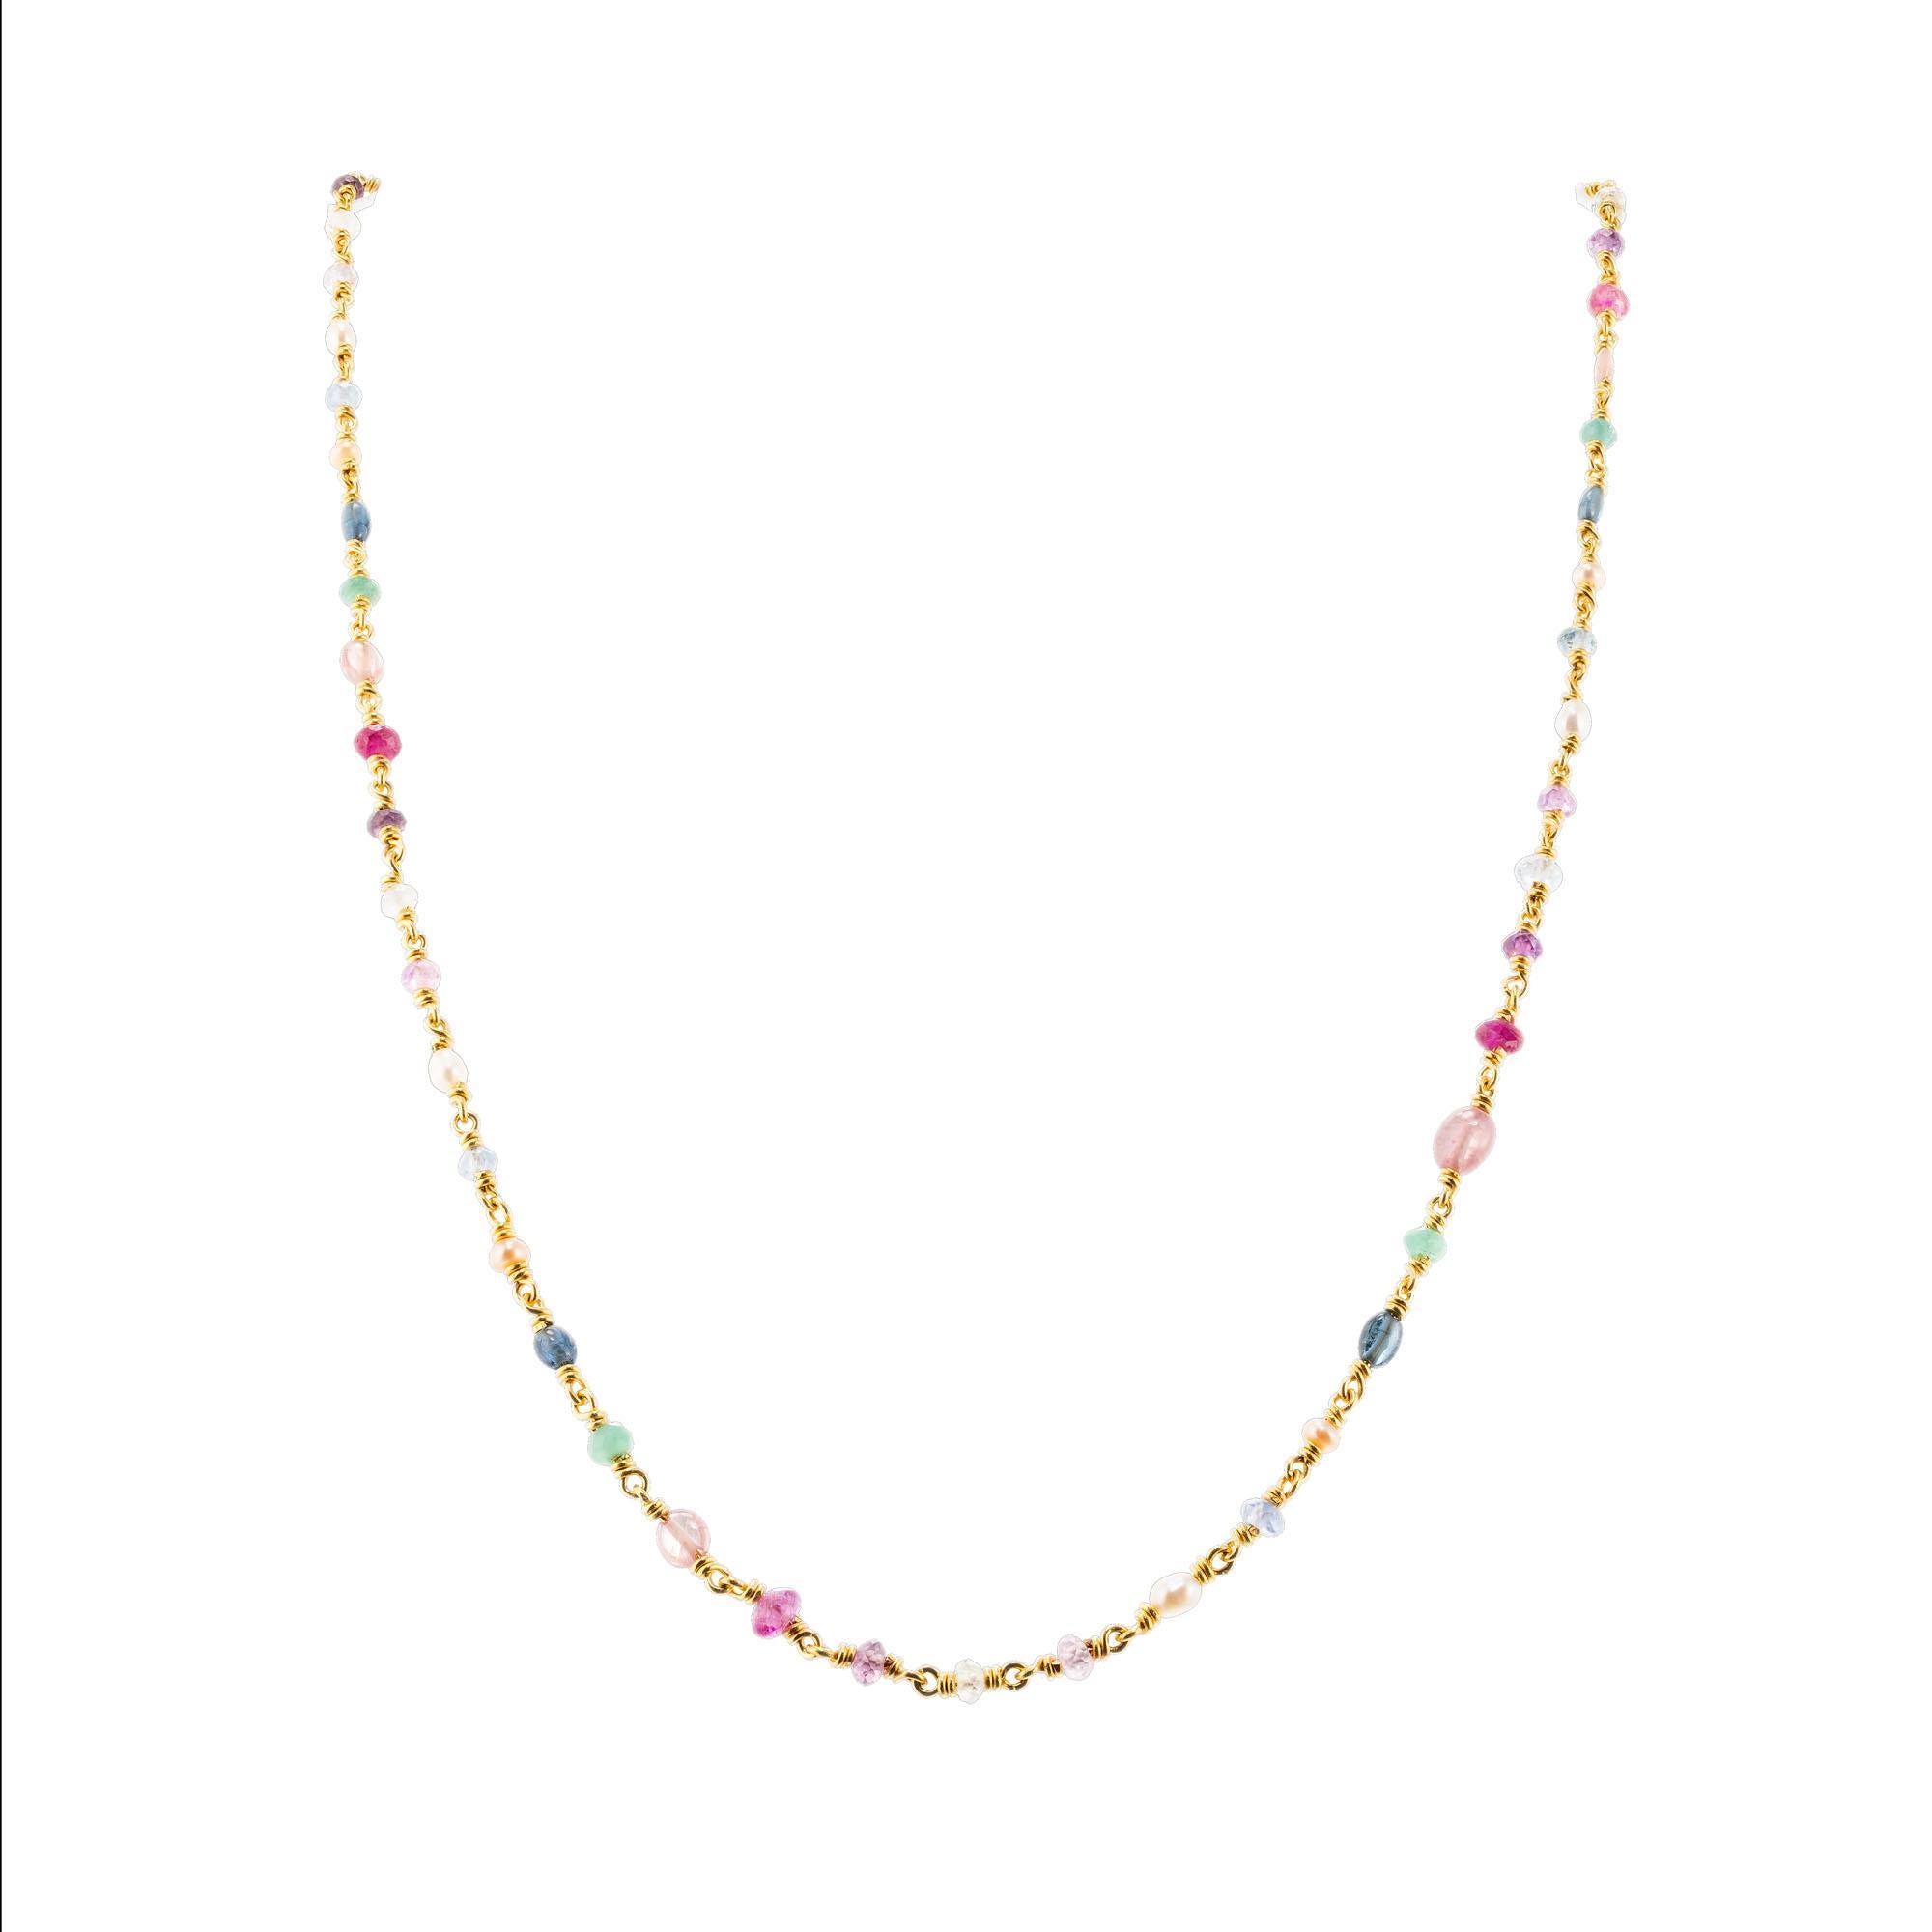 Reinstein Ross multi-stone Ruby, Sapphire, Amethyst, Emerald and pearl Yellow Gold Bead Necklace. 22k yellow gold. 

46 ruby, sapphire, amethyst, emerald stones 
11 2.7-2.8mm Pearls 
22k yellow gold 
Stamped: 22k
Hallmark: R/R Reinstein Ross
9.7